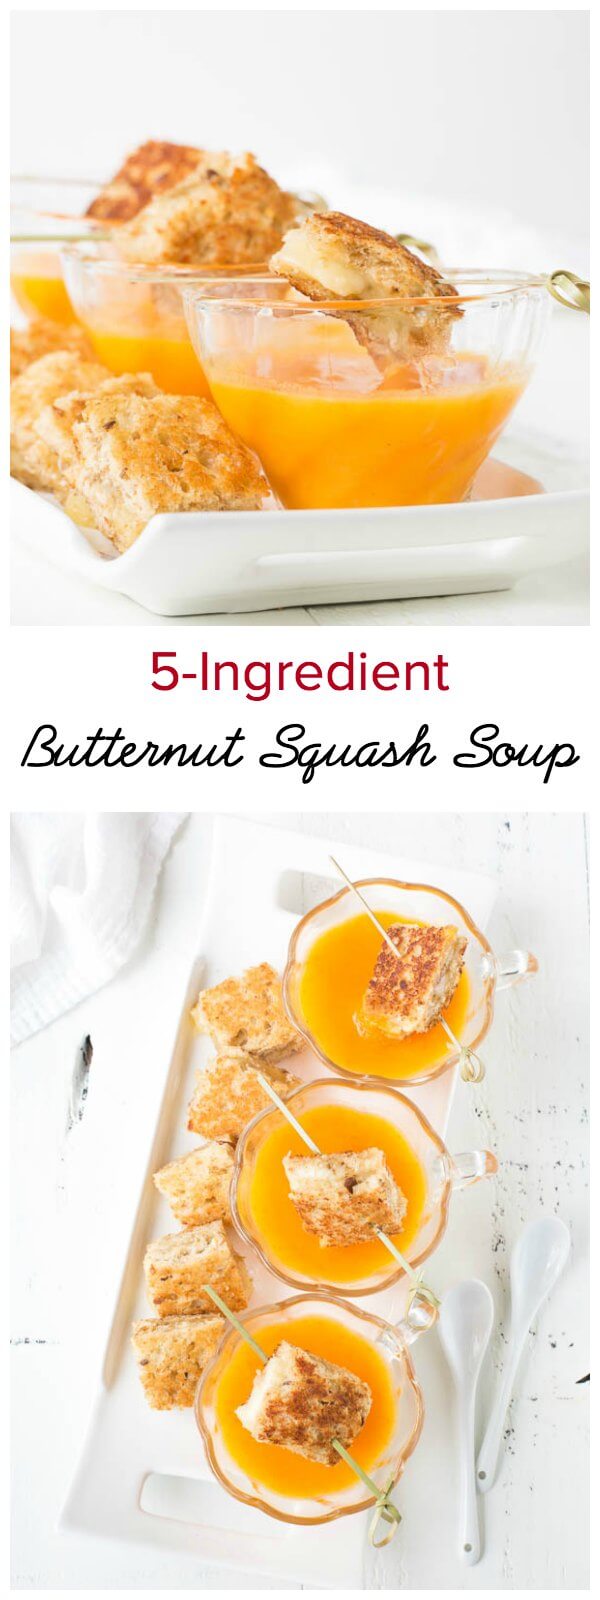 Velvety smooth butternut squash soup with only 5 ingredients and under 45 minutes! You don't need a long list of ingredients to make this super easy butternut squash soup packed with fabulous fall flavors. Delicious and elegant make-ahead appetizer for any kind of gathering!